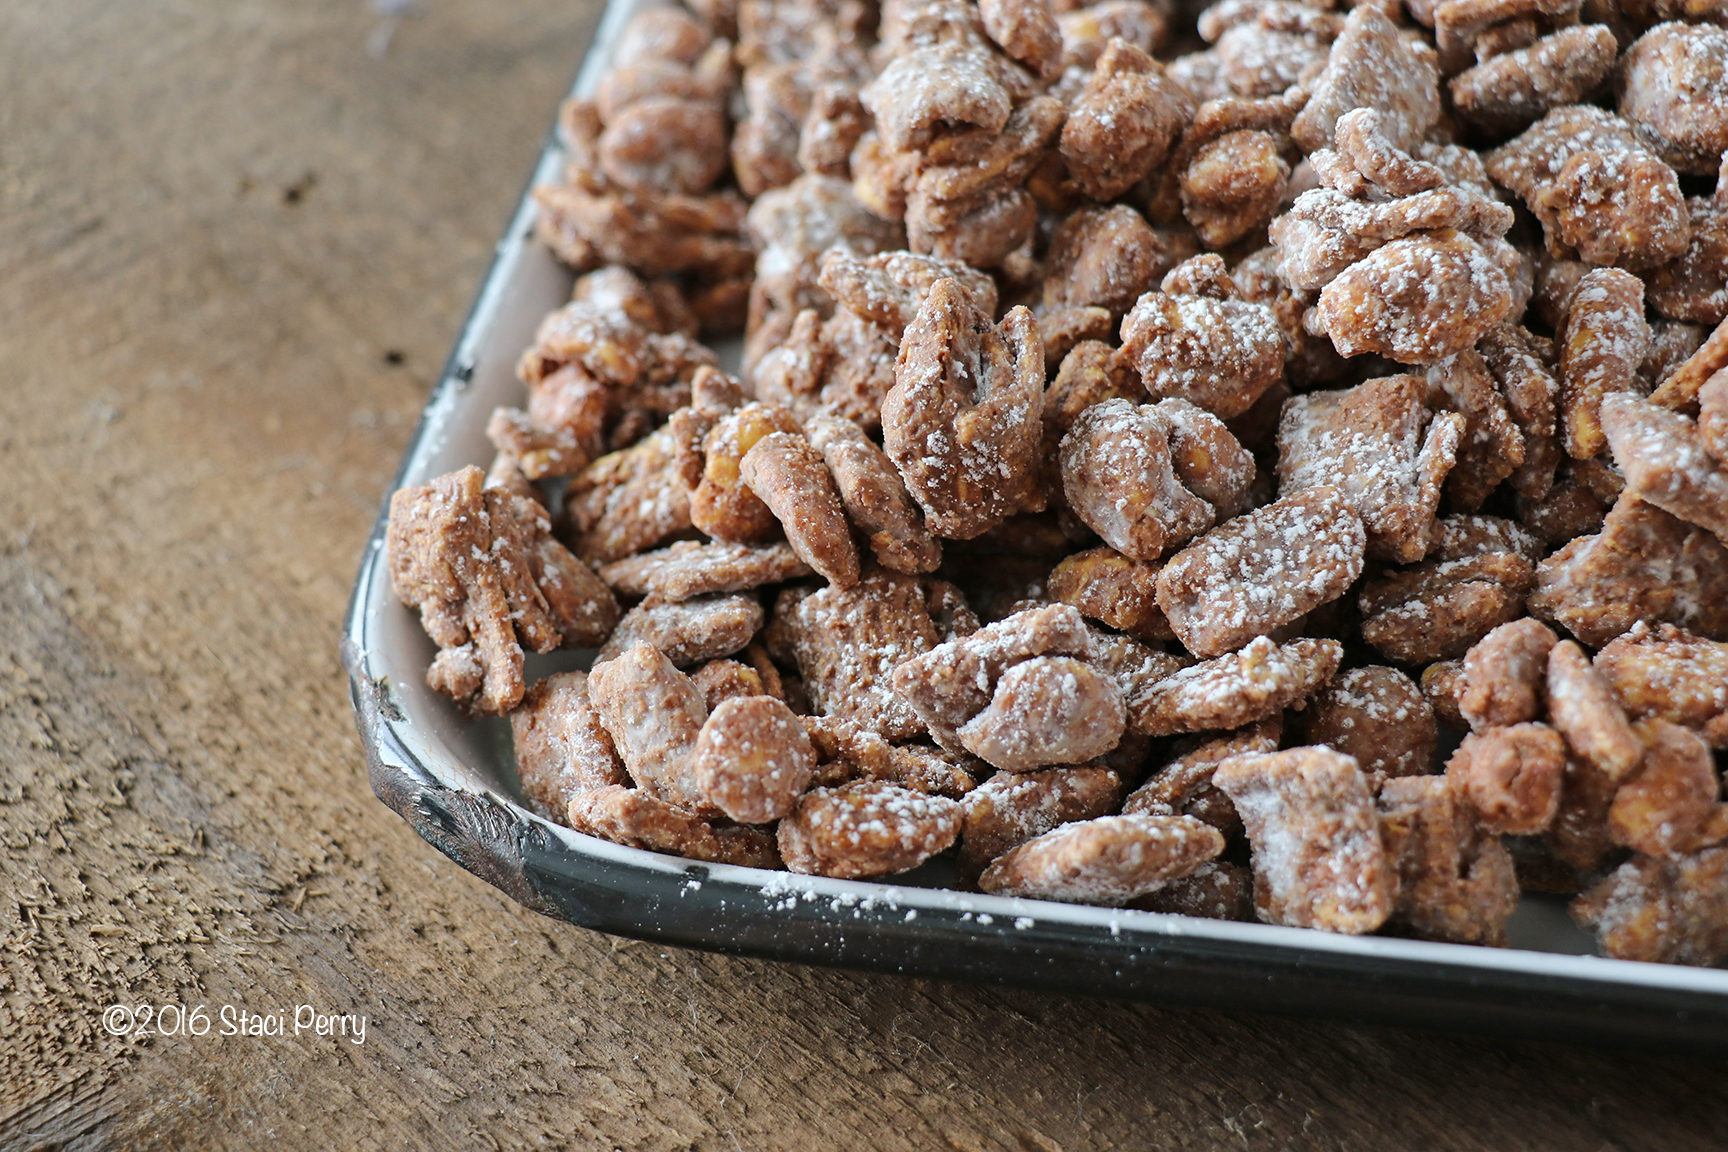 Empty the cereal cupboard: hodgepodge puppy chow